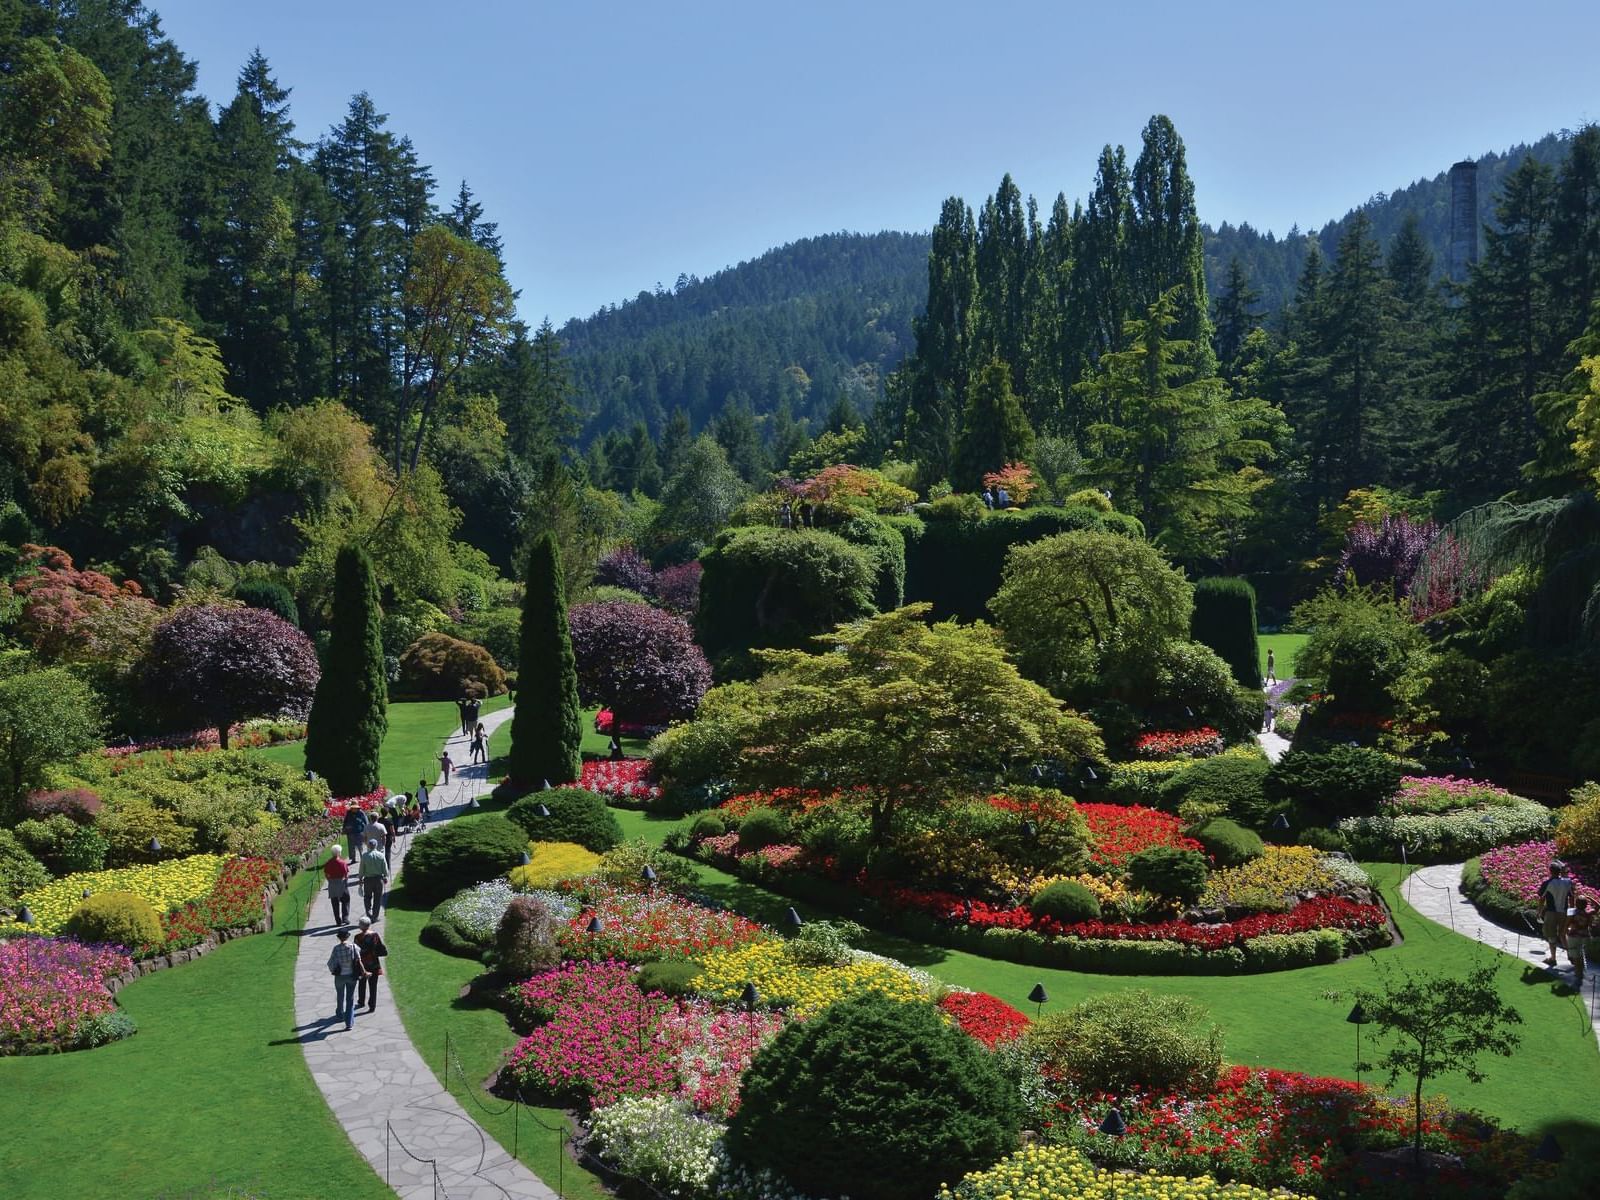 Landscape view of well-maintain Butchart Gardens near Huntingdon Manor